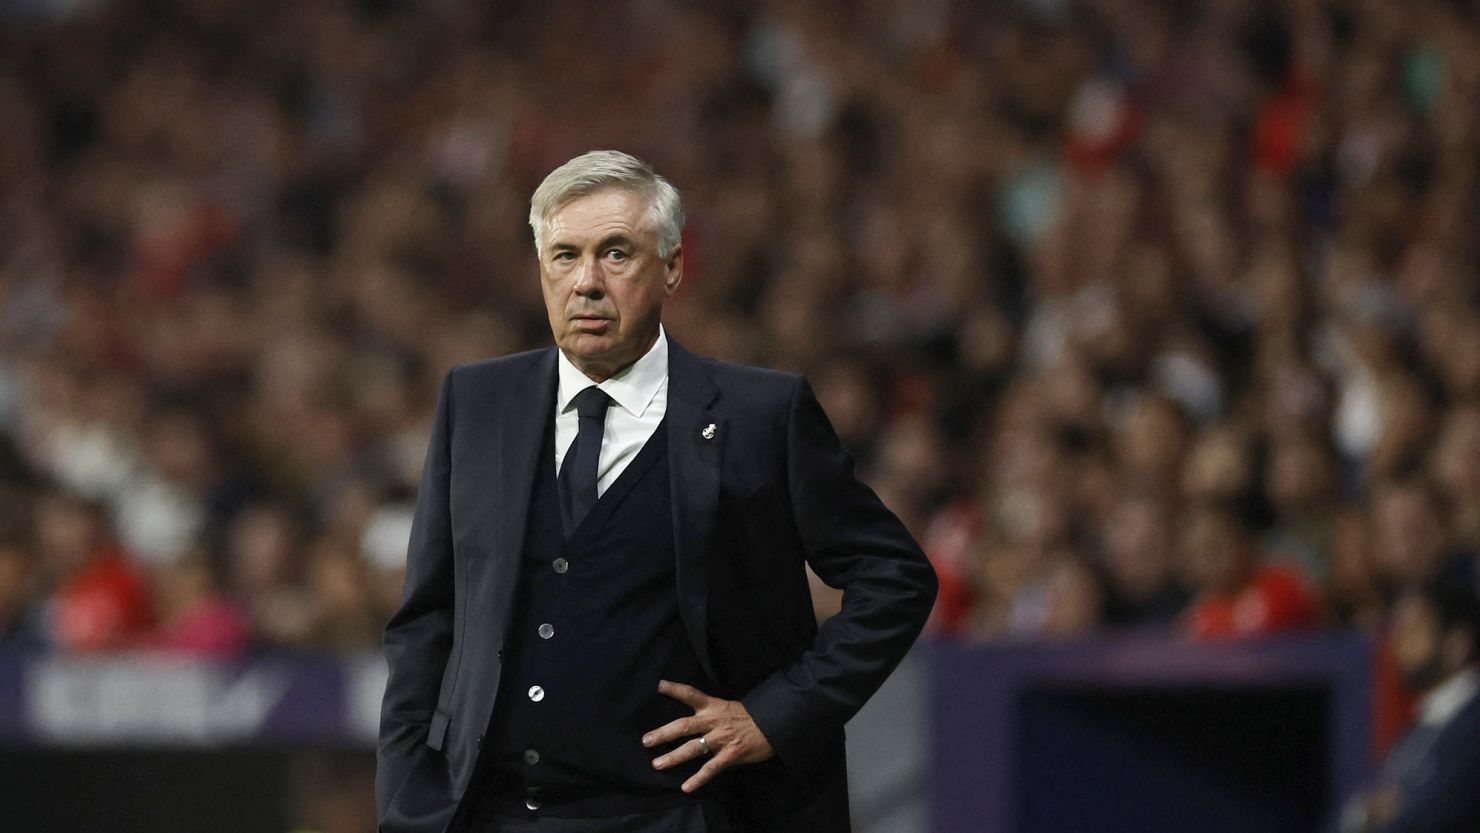 Real Madrid's Italian coach Carlo Ancelotti is pictured during the Spanish Liga football match between Club Atletico de Madrid and Real Madrid CF at the Metropolitano stadium in Madrid on September 24, 2023. (Photo by OSCAR DEL POZO / AFP) (Photo by OSCAR DEL POZO/AFP via Getty Images)